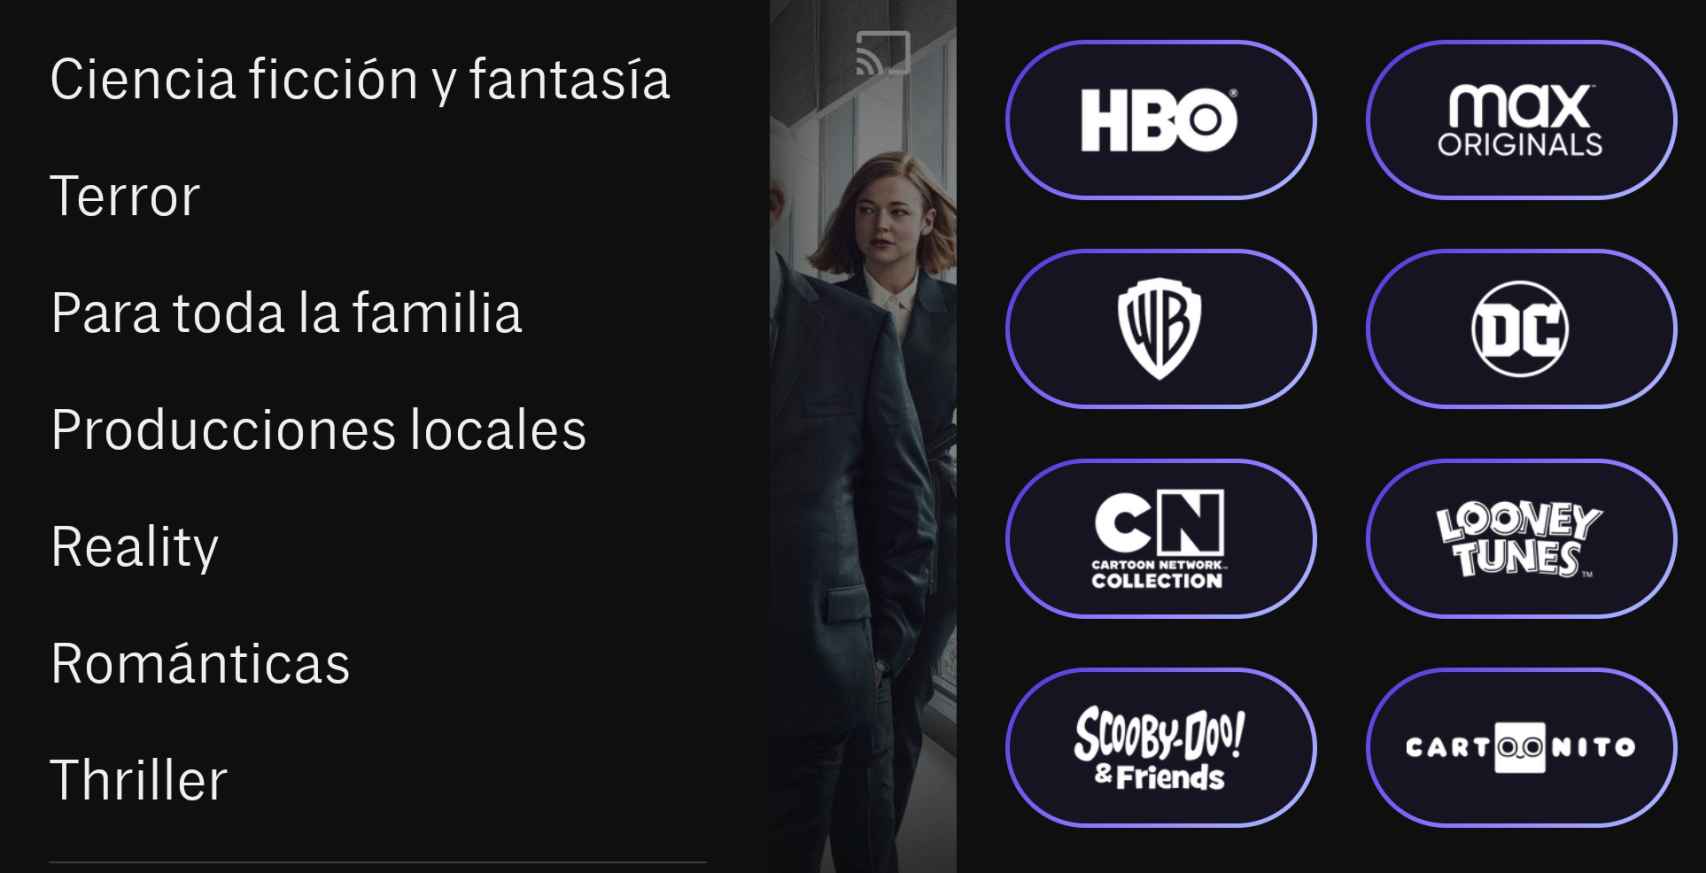 Categories and hubs on HBO Max